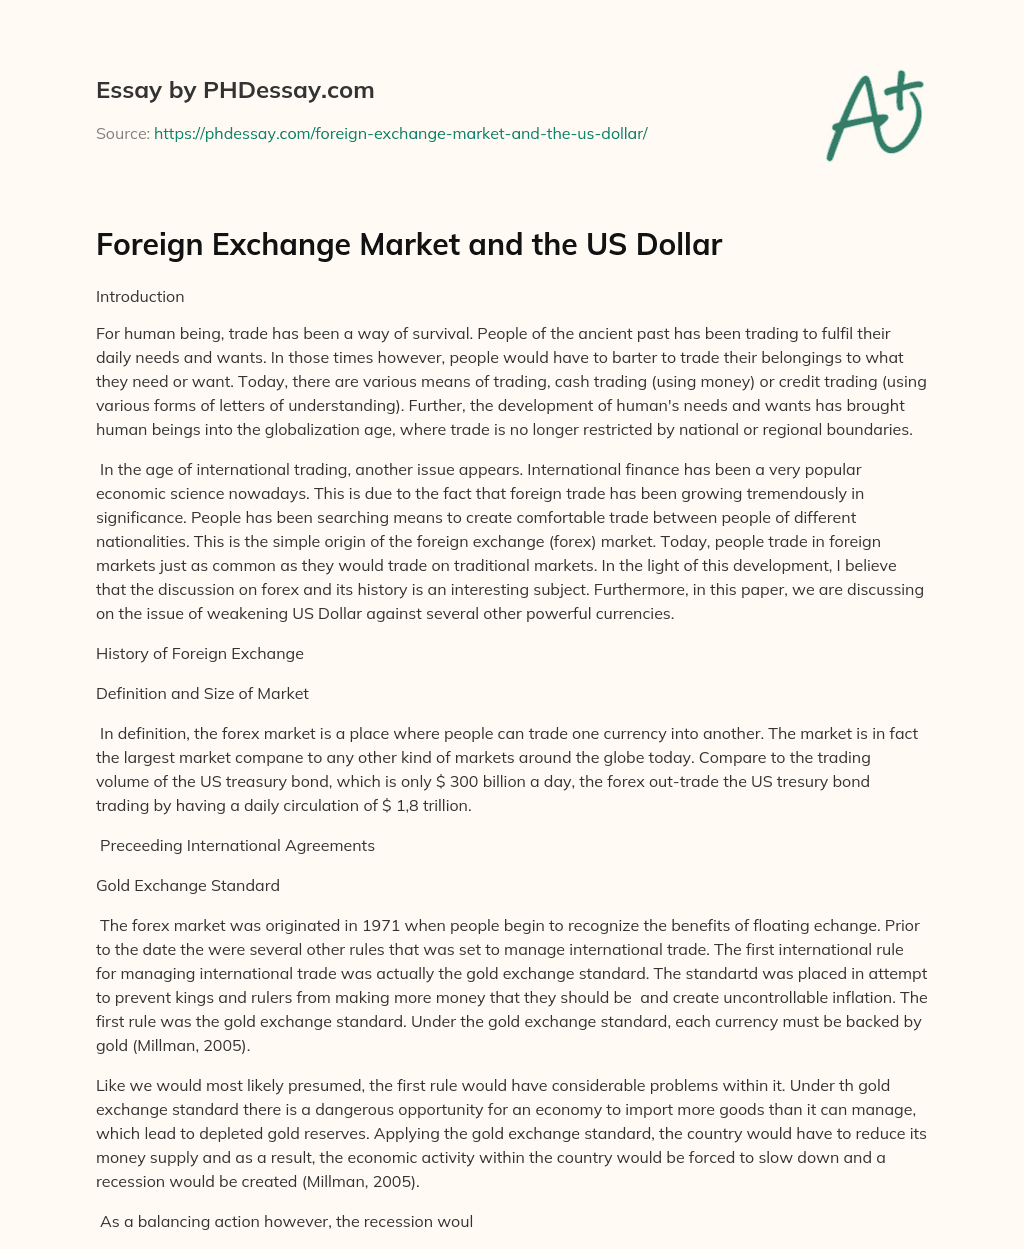 Foreign Exchange Market and the US Dollar essay